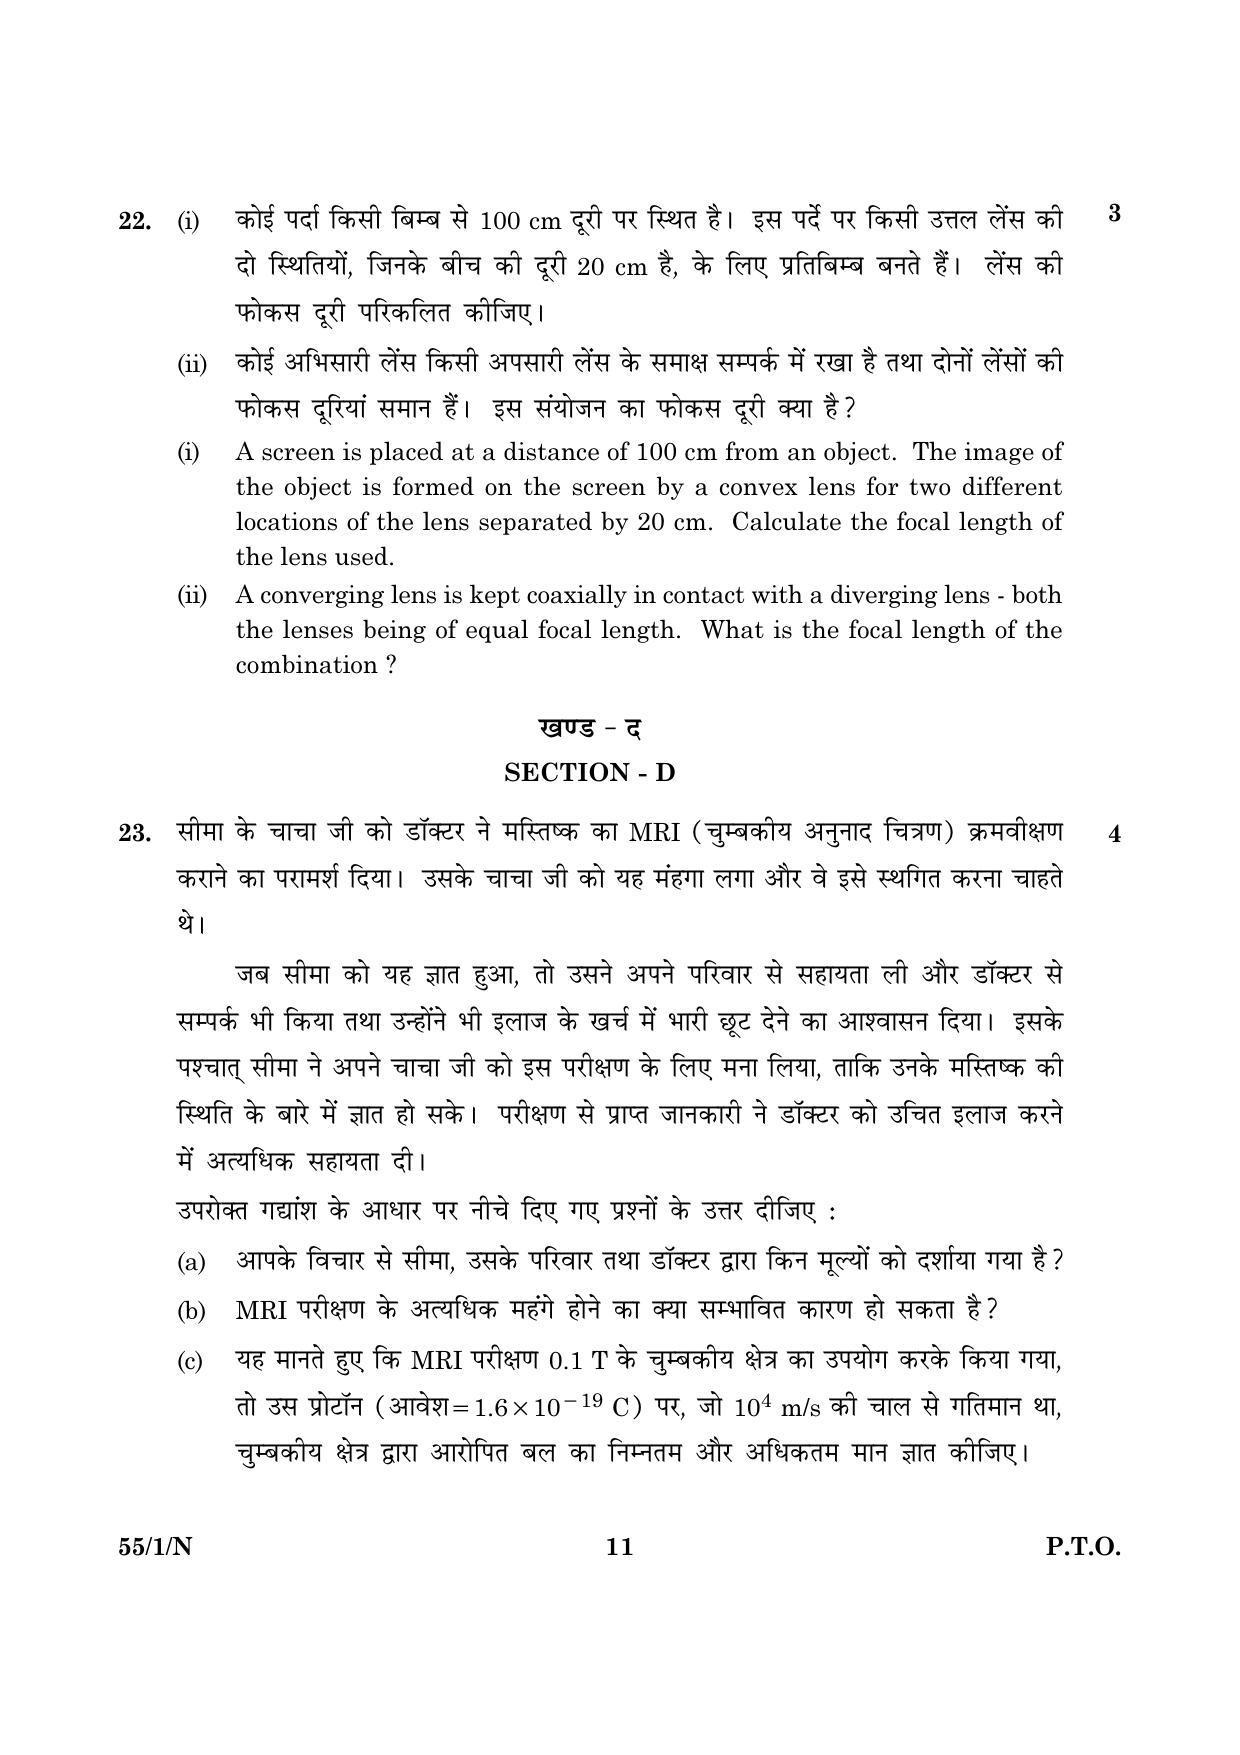 CBSE Class 12 055 Set 1 N Physics Theory 2016 Question Paper - Page 11